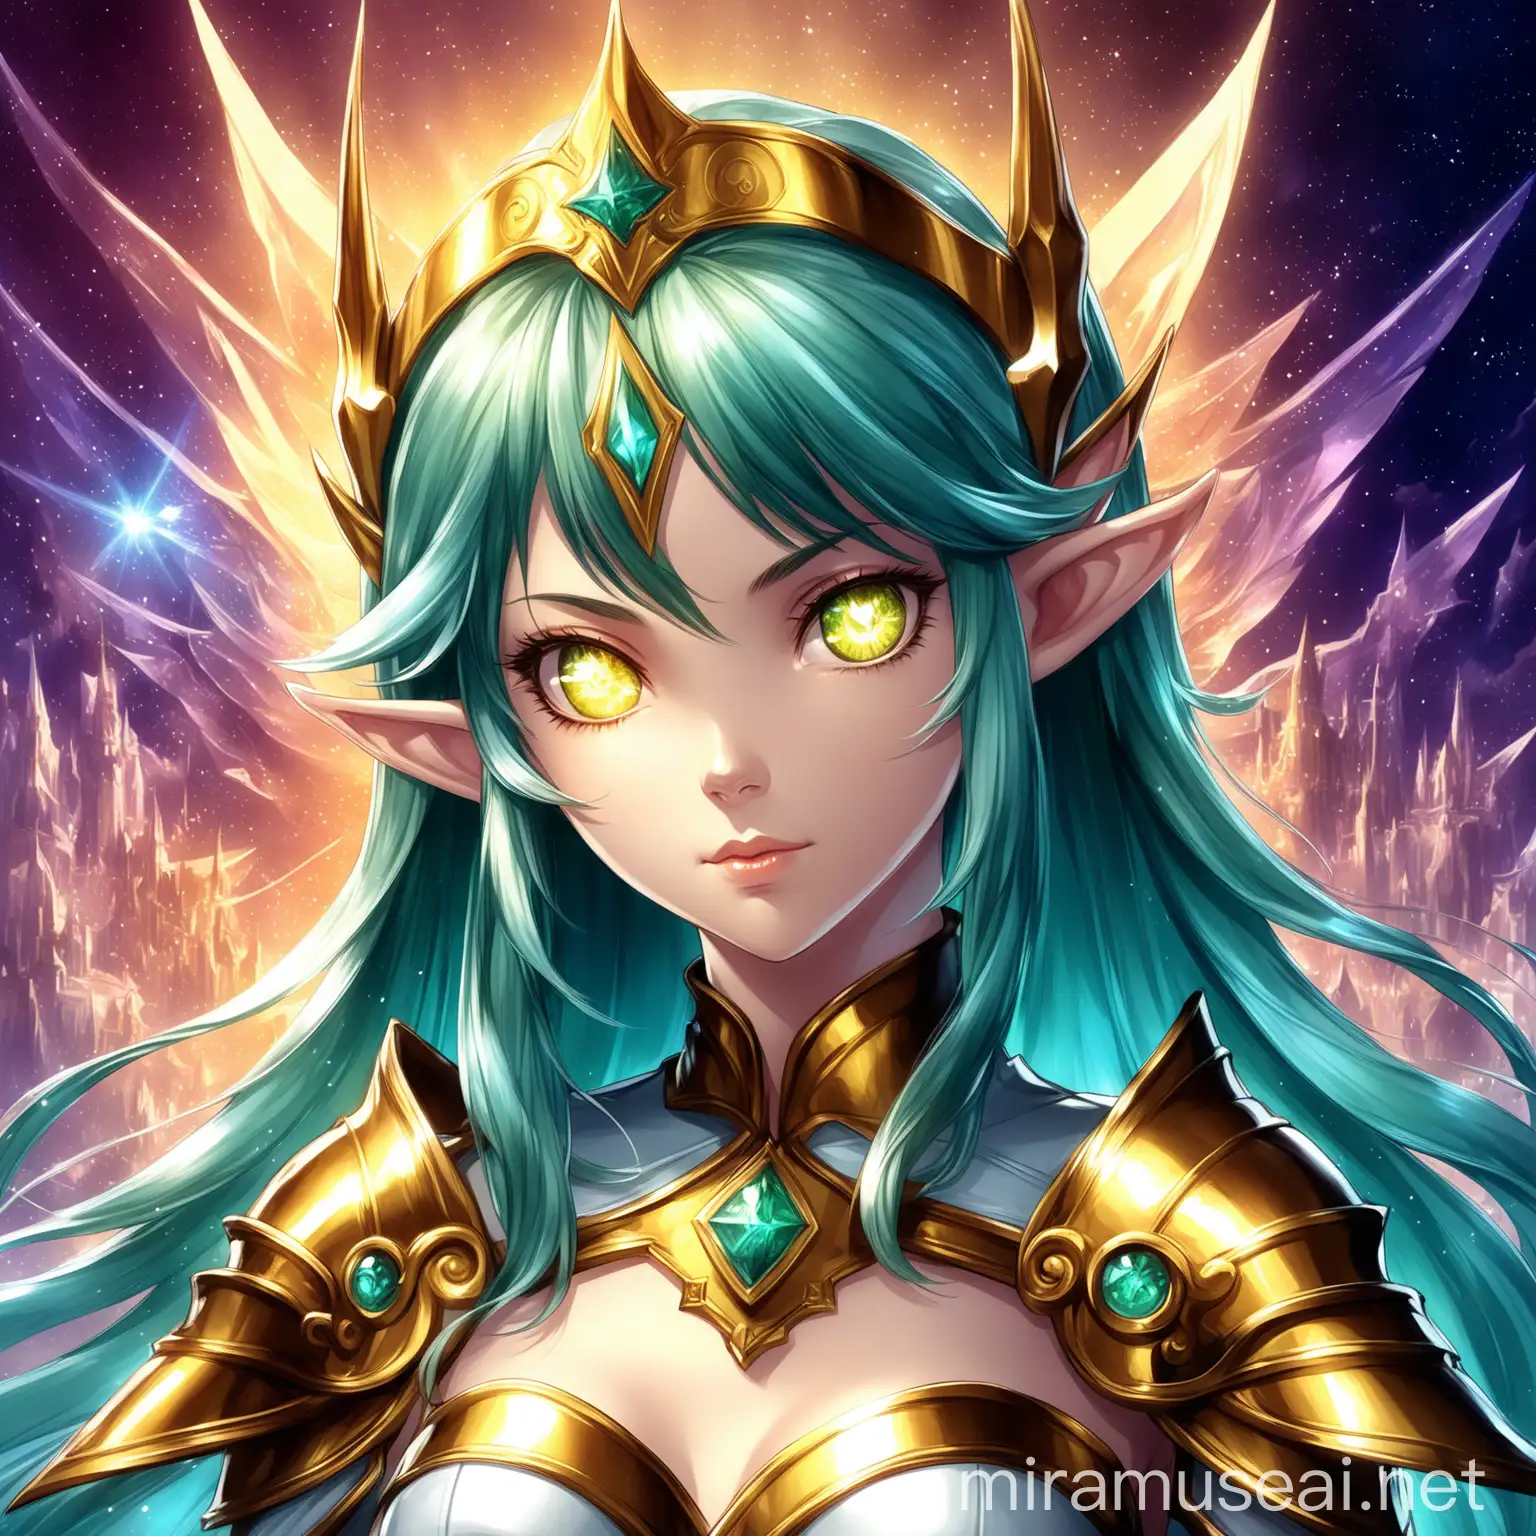 a anime character, alluring elf princess knight, anime in fantasy style, 2. 5 d cgi anime fantasy artwork, portrait knights of zodiac girl, elf girl, artgerm and genzoman, anime fantasy illustration, anime girl with teal hair, epic light novel art cover, she has elf ears and gold eye. in anime